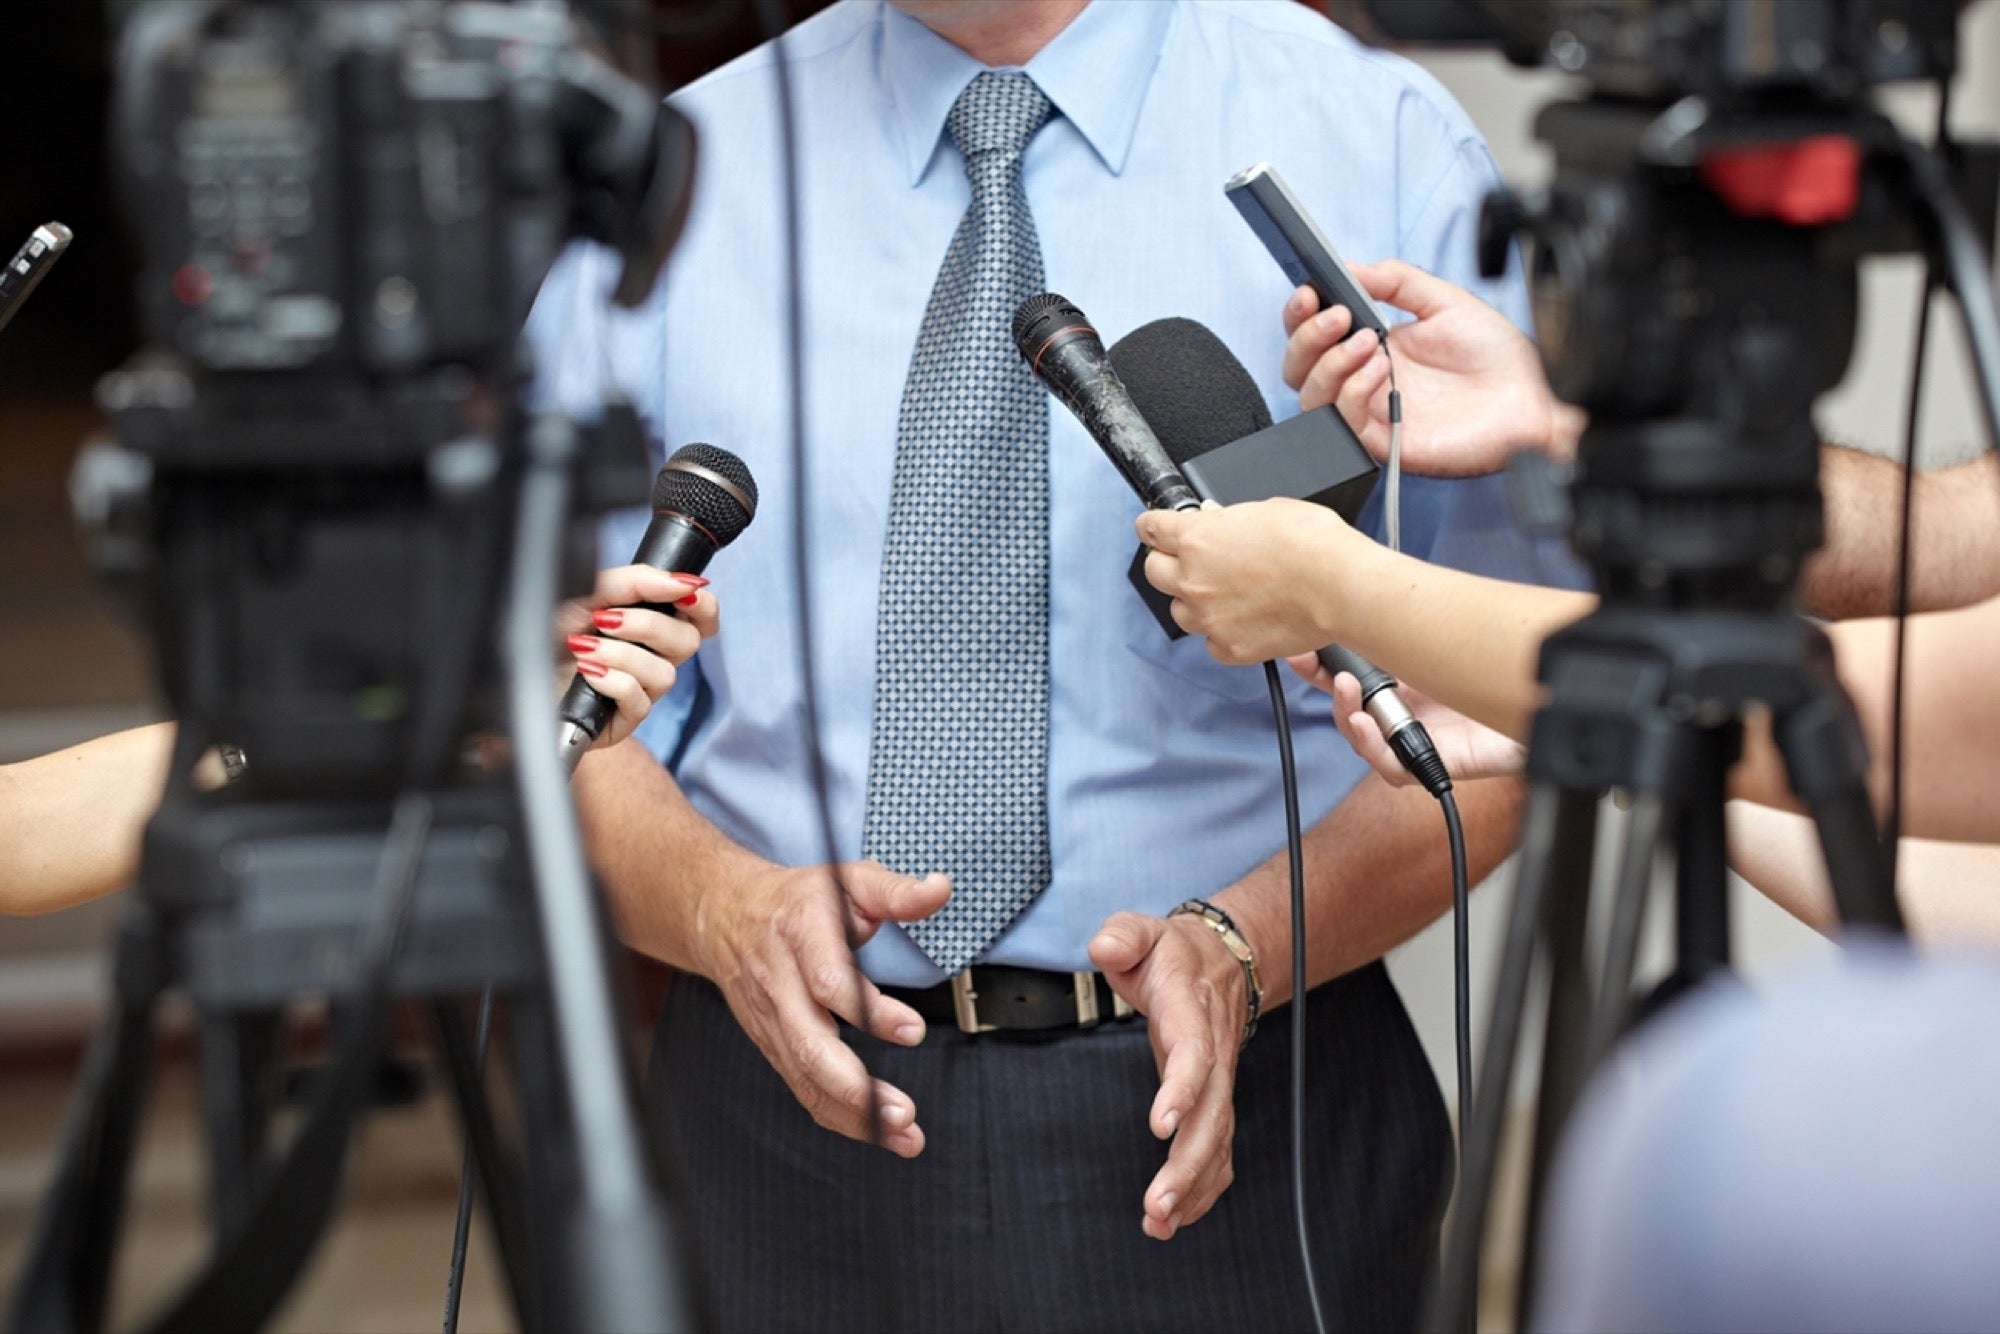 Man wearing blue shirt and tie being interviewed with mics and cameras in front of him